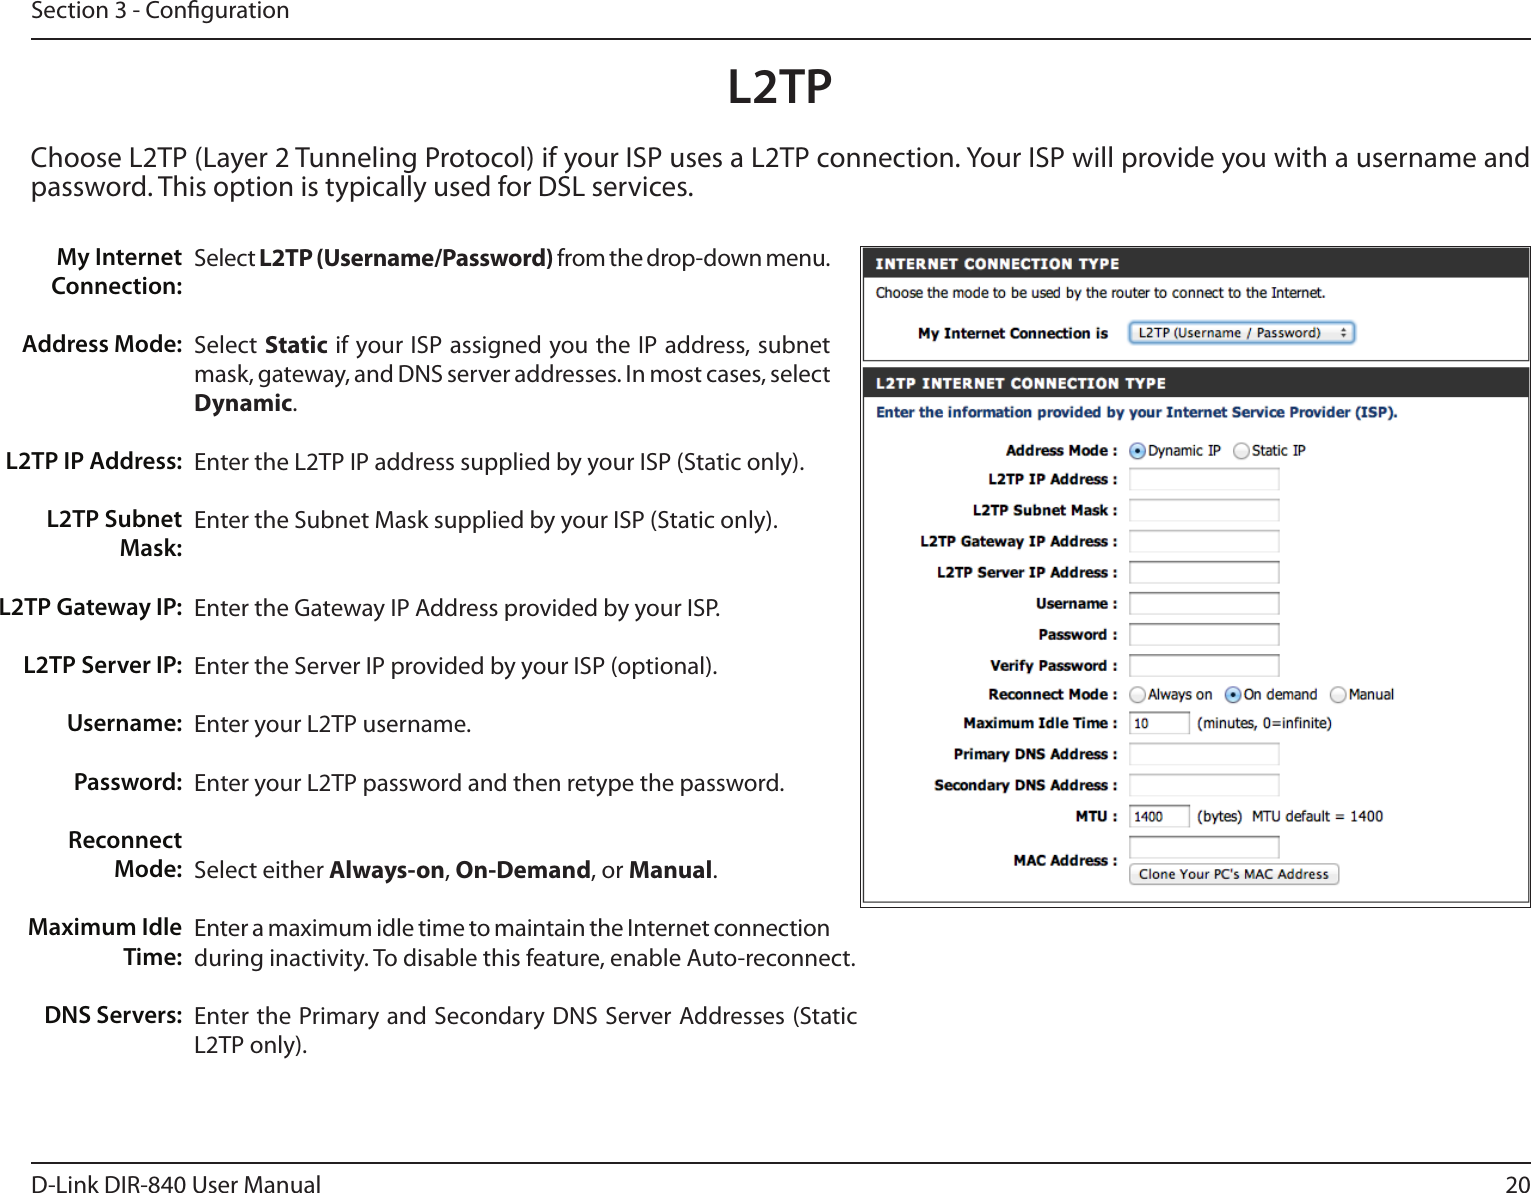 20D-Link DIR-840 User ManualSection 3 - CongurationSelect L2TP (Username/Password) from the drop-down menu.Select Static if your ISP assigned you the IP address, subnet mask, gateway, and DNS server addresses. In most cases, select Dynamic.Enter the L2TP IP address supplied by your ISP (Static only).Enter the Subnet Mask supplied by your ISP (Static only).Enter the Gateway IP Address provided by your ISP.Enter the Server IP provided by your ISP (optional).Enter your L2TP username.Enter your L2TP password and then retype the password.Select either Always-on, On-Demand, or Manual.Enter a maximum idle time to maintain the Internet connection during inactivity. To disable this feature, enable Auto-reconnect.Enter the Primary and Secondary DNS Server Addresses (Static L2TP only).My Internet Connection:Address Mode:L2TP IP Address:L2TP Subnet Mask:L2TP Gateway IP:L2TP Server IP:Username:Password:Reconnect Mode:Maximum Idle Time: DNS Servers:L2TPChoose L2TP (Layer 2 Tunneling Protocol) if your ISP uses a L2TP connection. Your ISP will provide you with a username and password. This option is typically used for DSL services. 